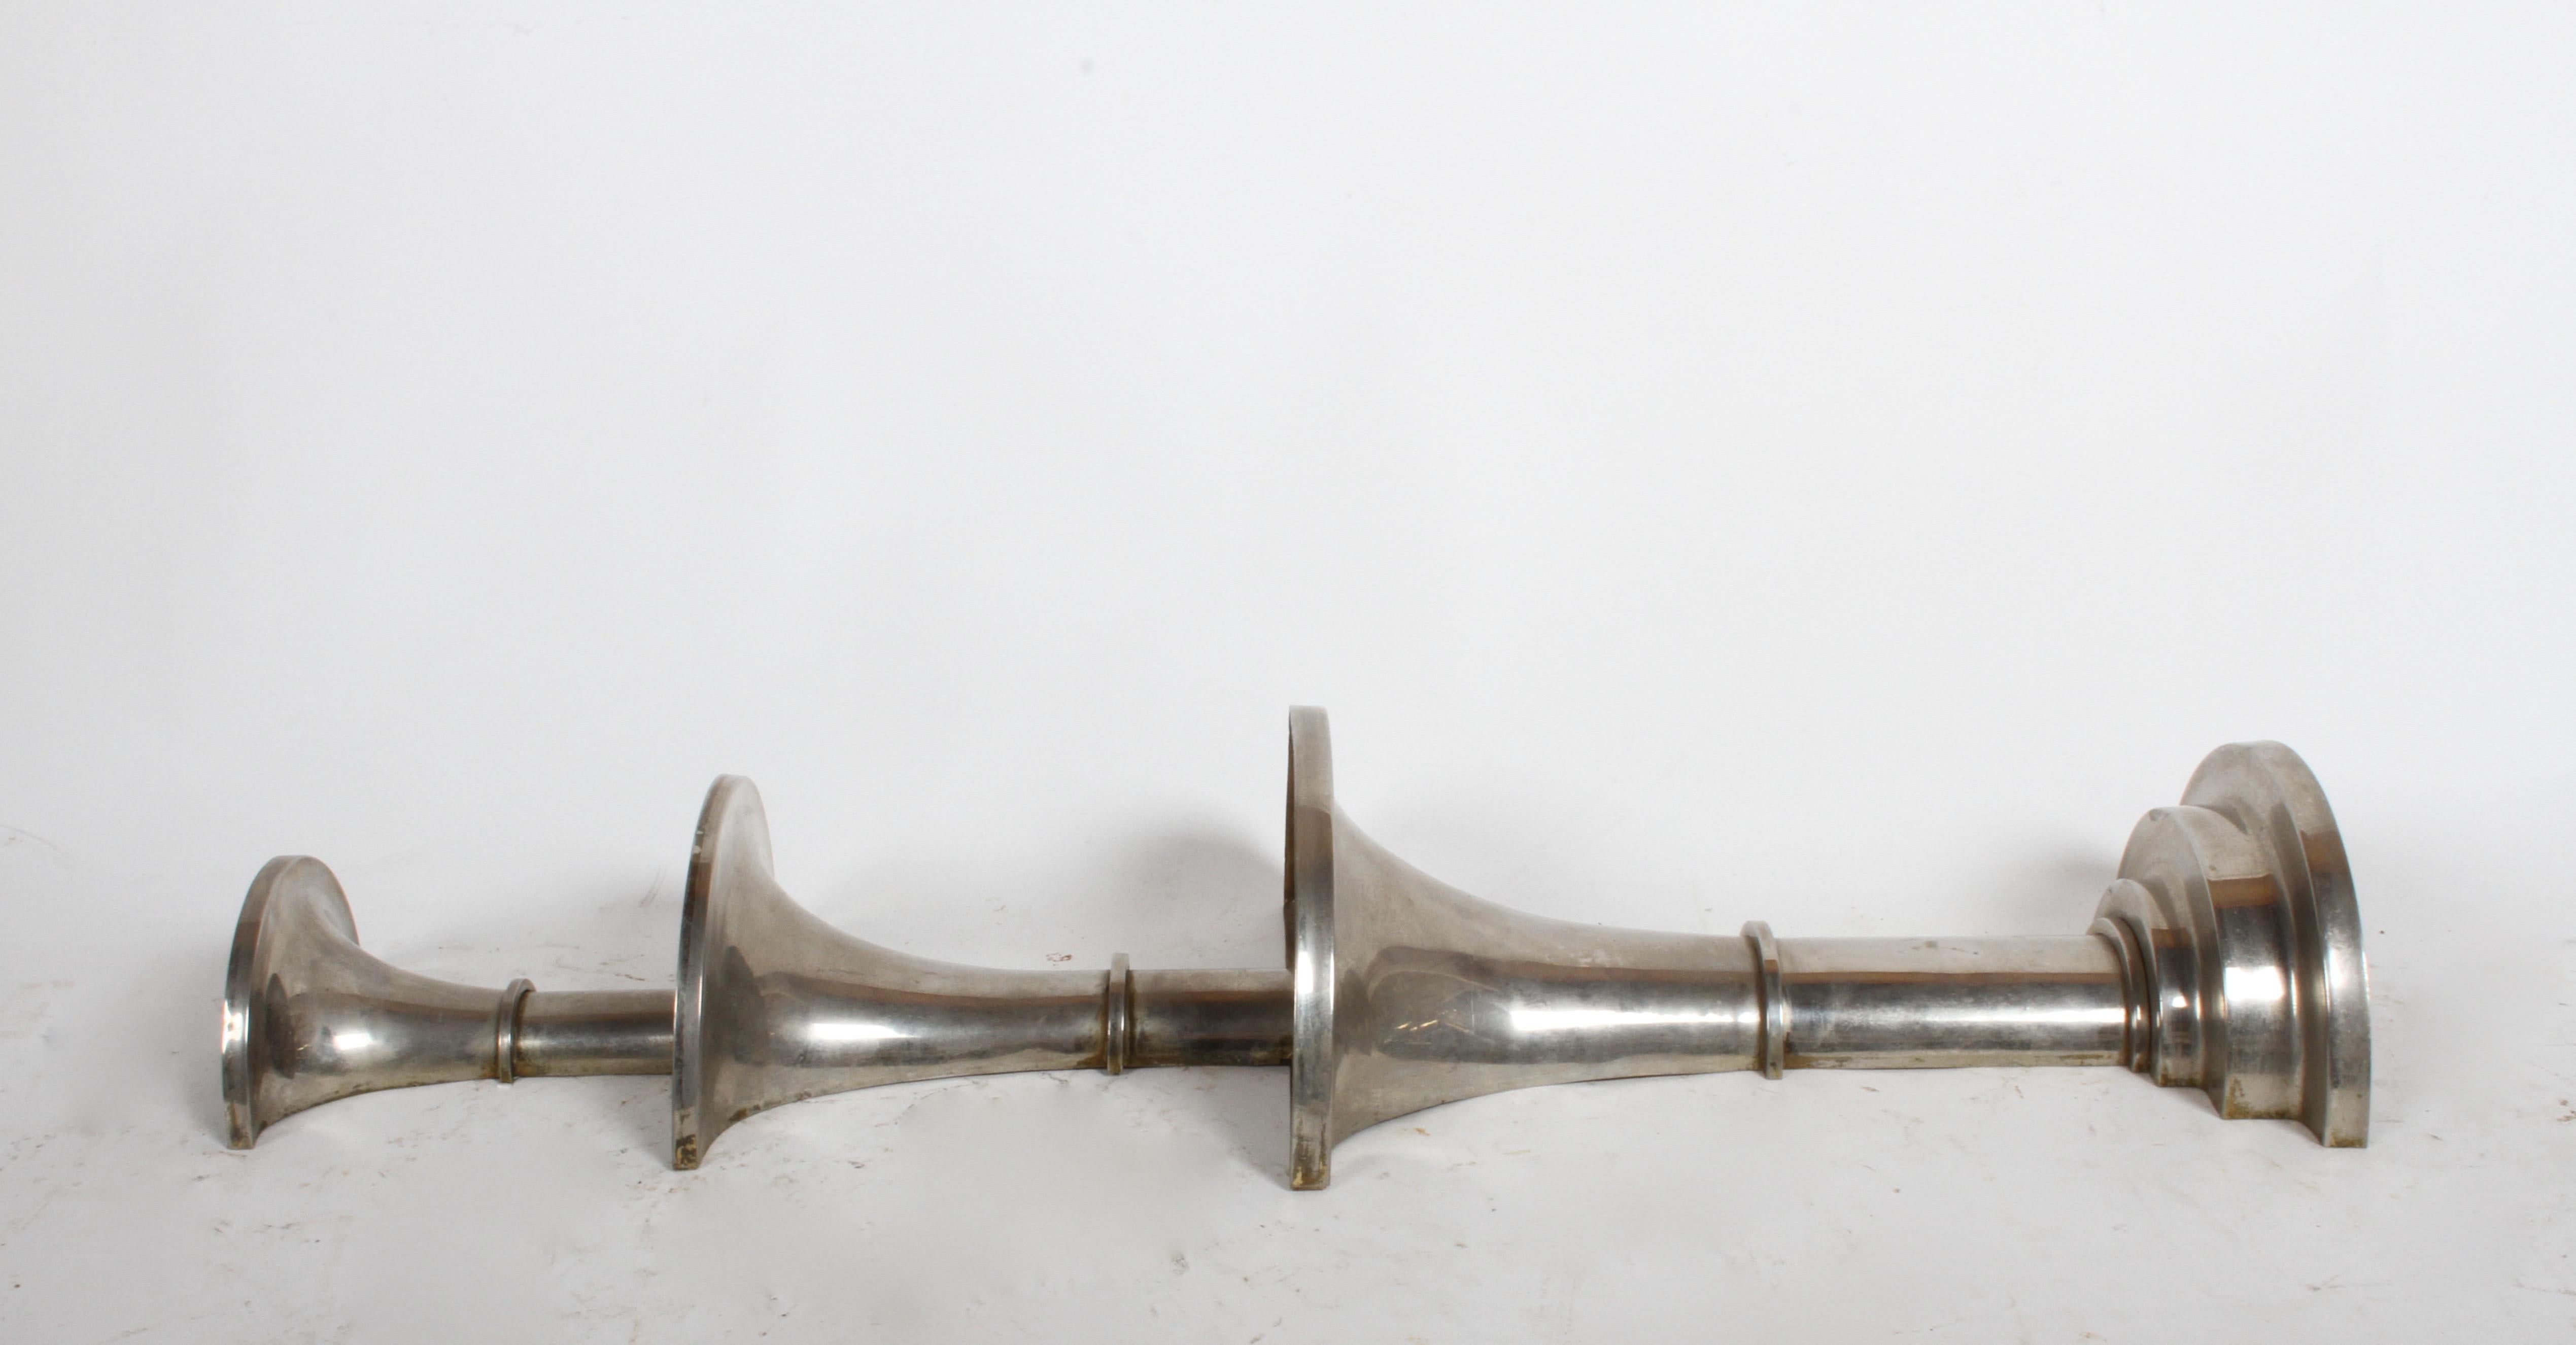 Pair of Nickel-Plated Art Deco Wall Floral Sconces For Sale 6